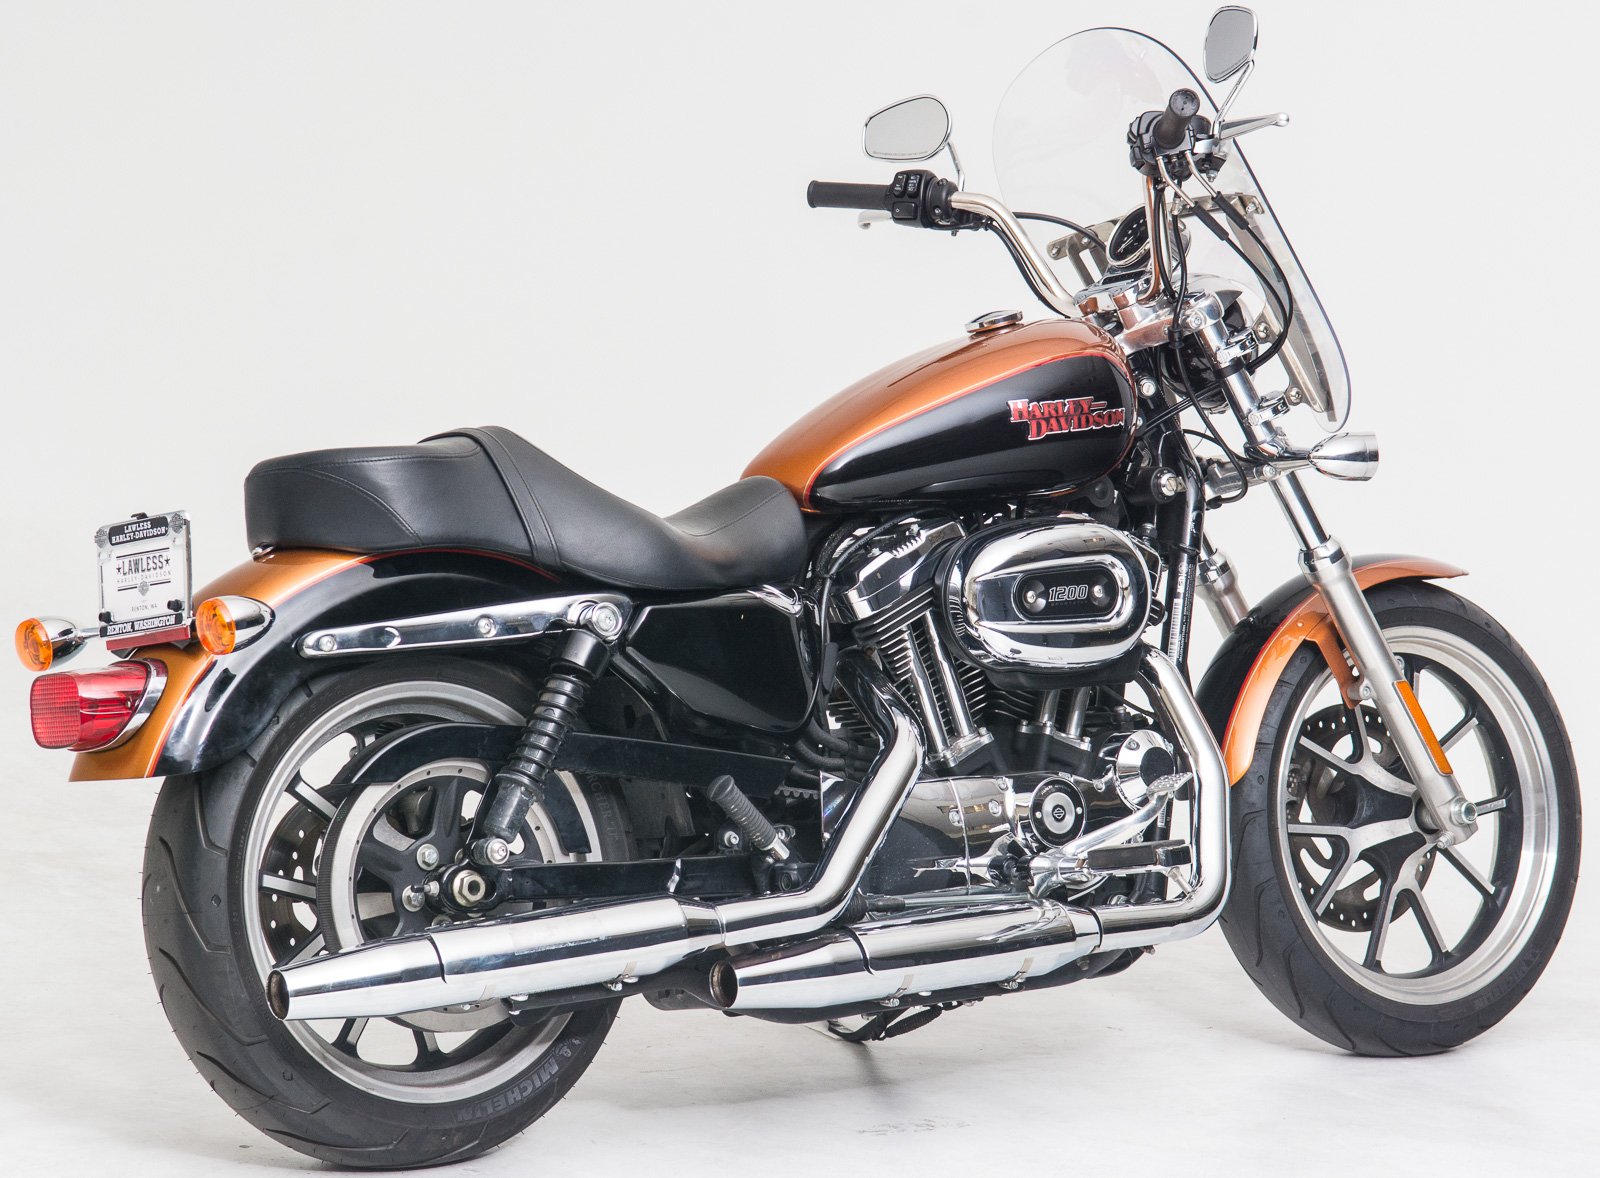 Pre-Owned 2015 Harley-Davidson Sportster Superlow 1200T XL1200T